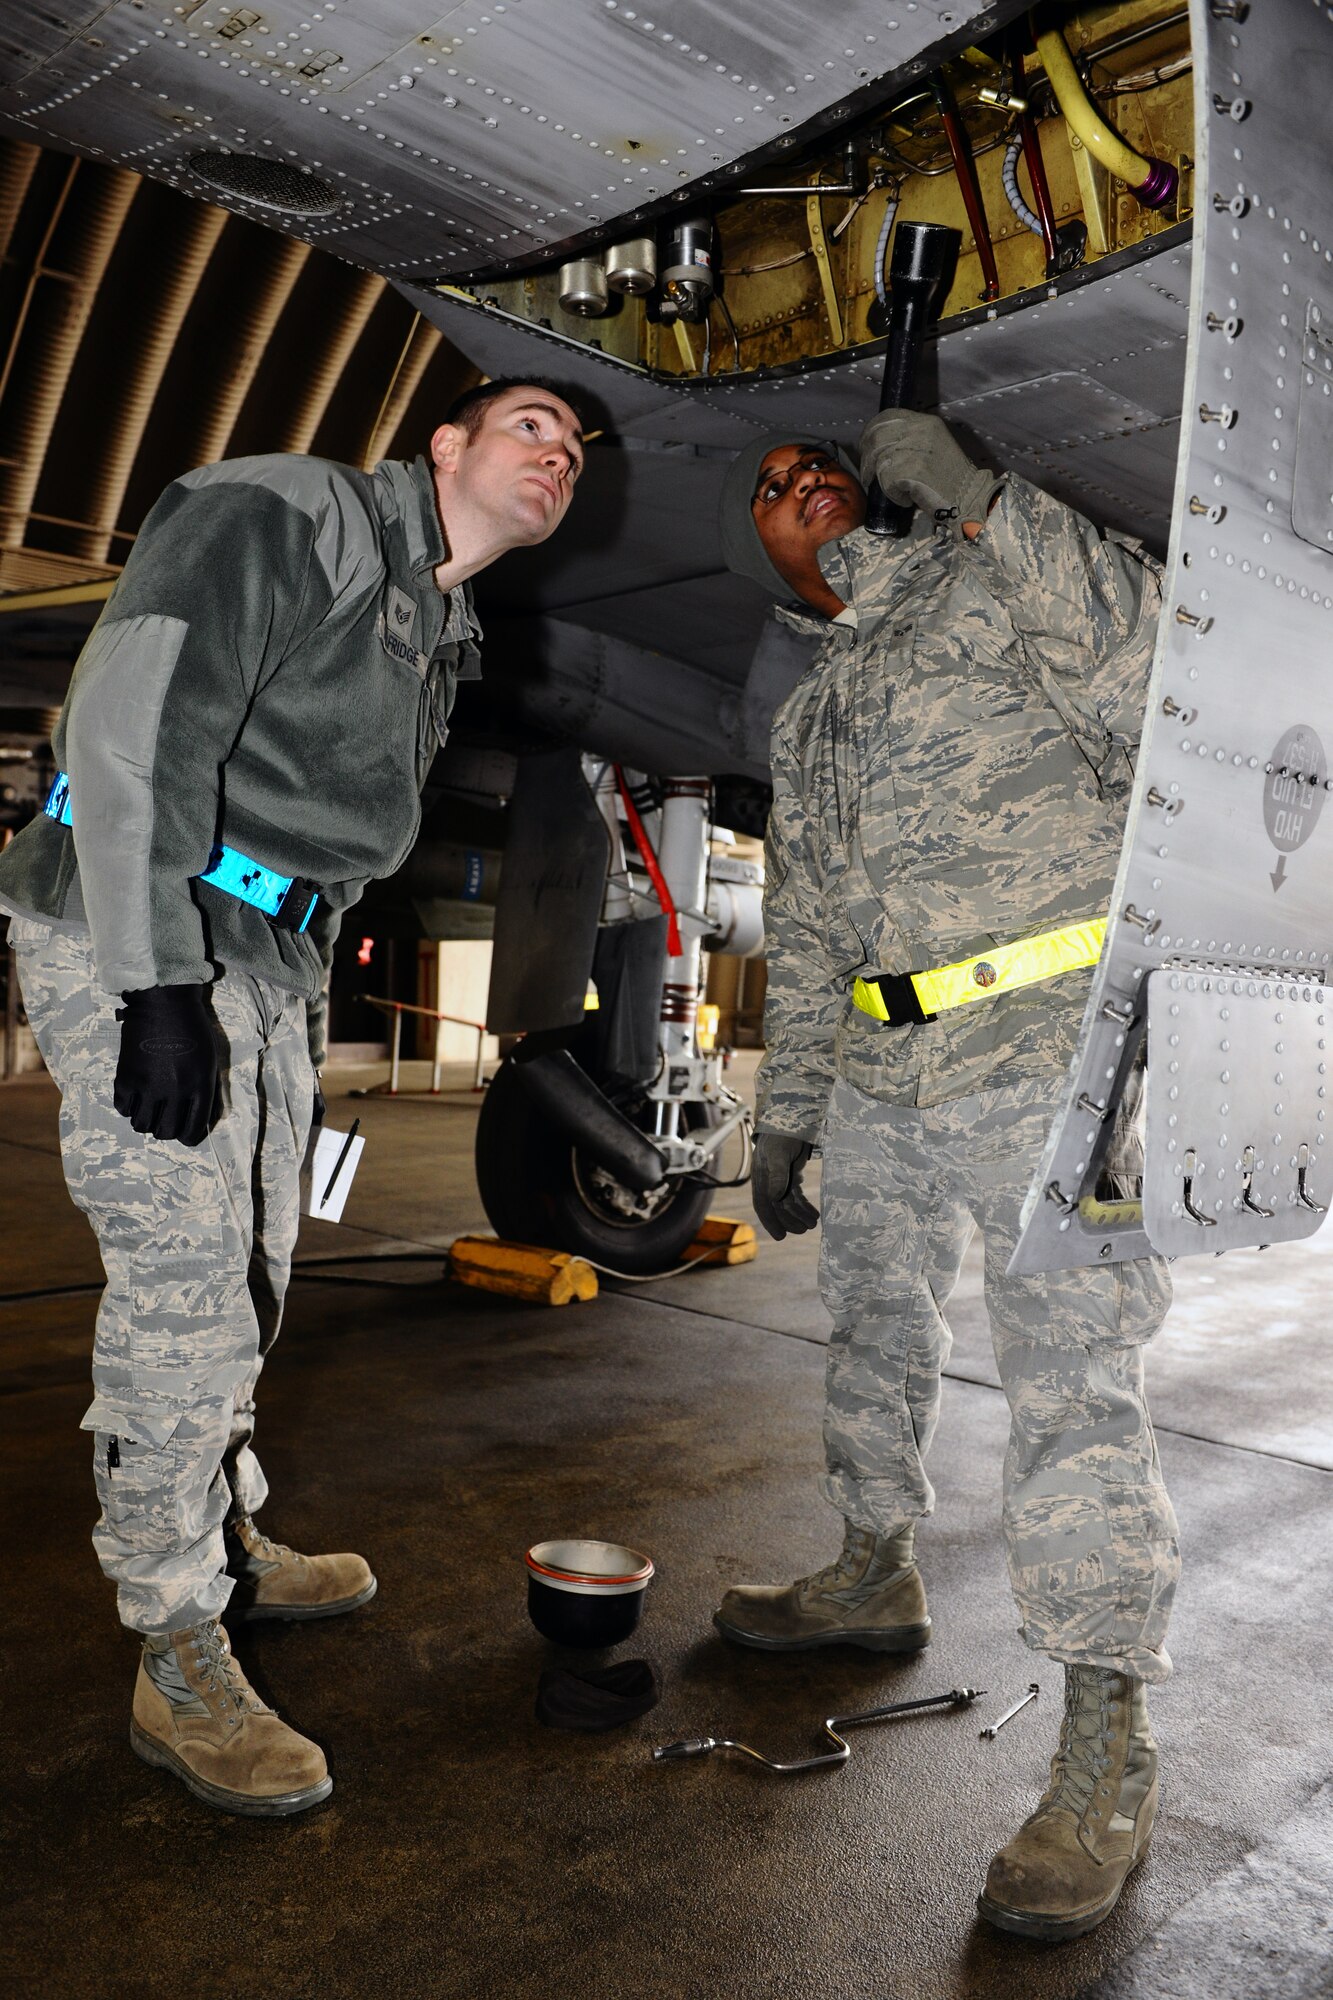 SPANGDAHLEM AIR BASE, Germany – Staff Sgt. Michael Selfridge, left, 52nd Maintenance Operations Squadron aircraft maintenance inspector, inspects Senior Airman William Jones’, 52nd Aircraft Maintenance Squadron environmental electrician journeyman, work while he troubleshoots an environmental control system issue of an A-10 Thunderbolt II inside Hardened Aircraft Shelter 16 here March 6. The AMXS quality assurance section is made up of eight certified maintenance inspectors who inspect 81st and 480th Fighter Squadron aircraft maintenance processes. Quality assurance modernizes the Air Force’s aircraft maintenance and training by tracking maintenance performance against metrics to improve efficiency, production, and reliability.  (U.S. Air Force photo by Airman 1st Class Dillon Davis/Released)